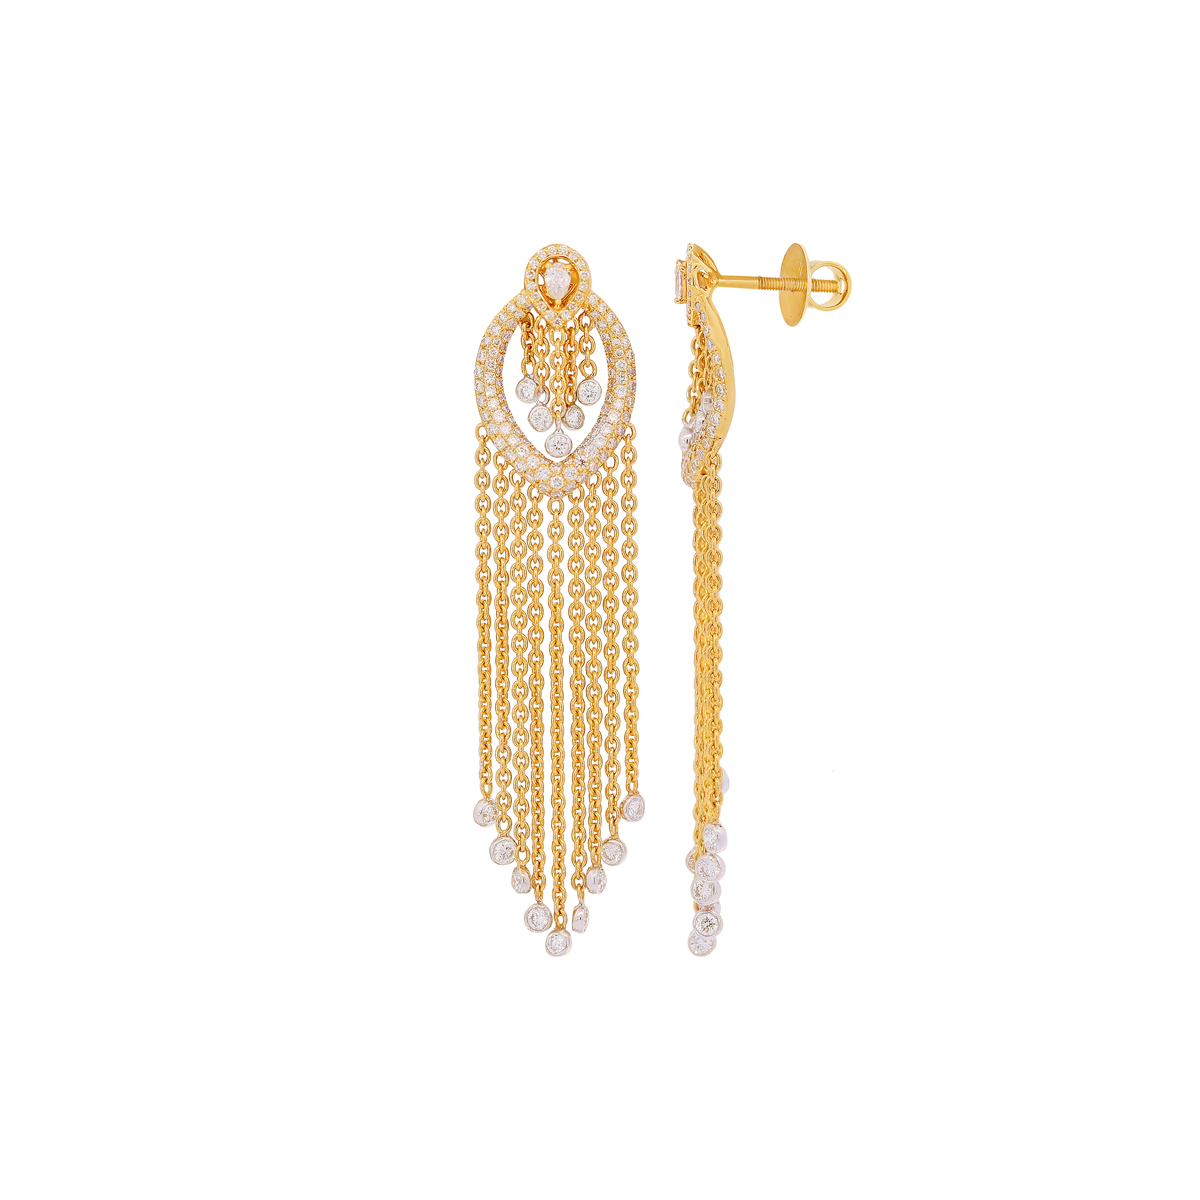 Drop earrings with a difference.... - Senco Gold & Diamonds | Facebook